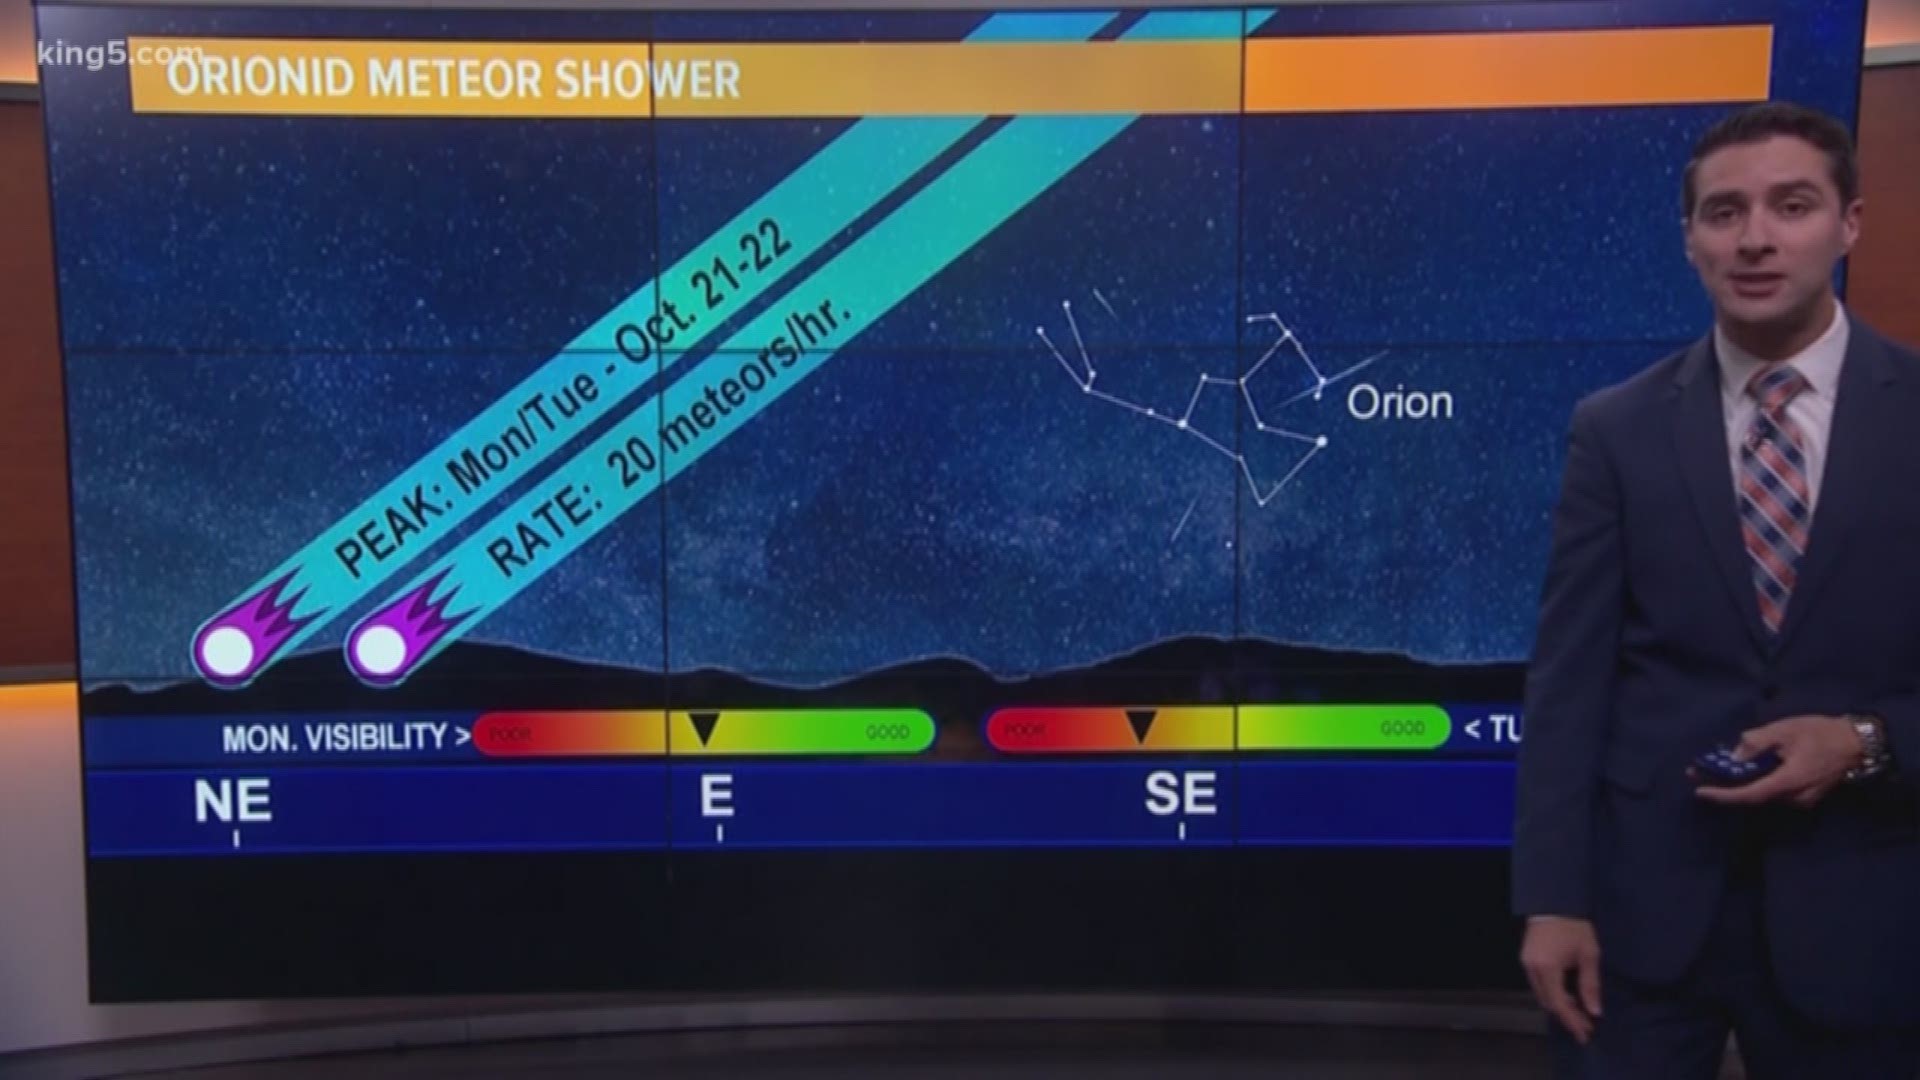 There's a lot happening in the night sky over Washington. KING 5 Meteorologist Ben Dery explains. king5.com/weather